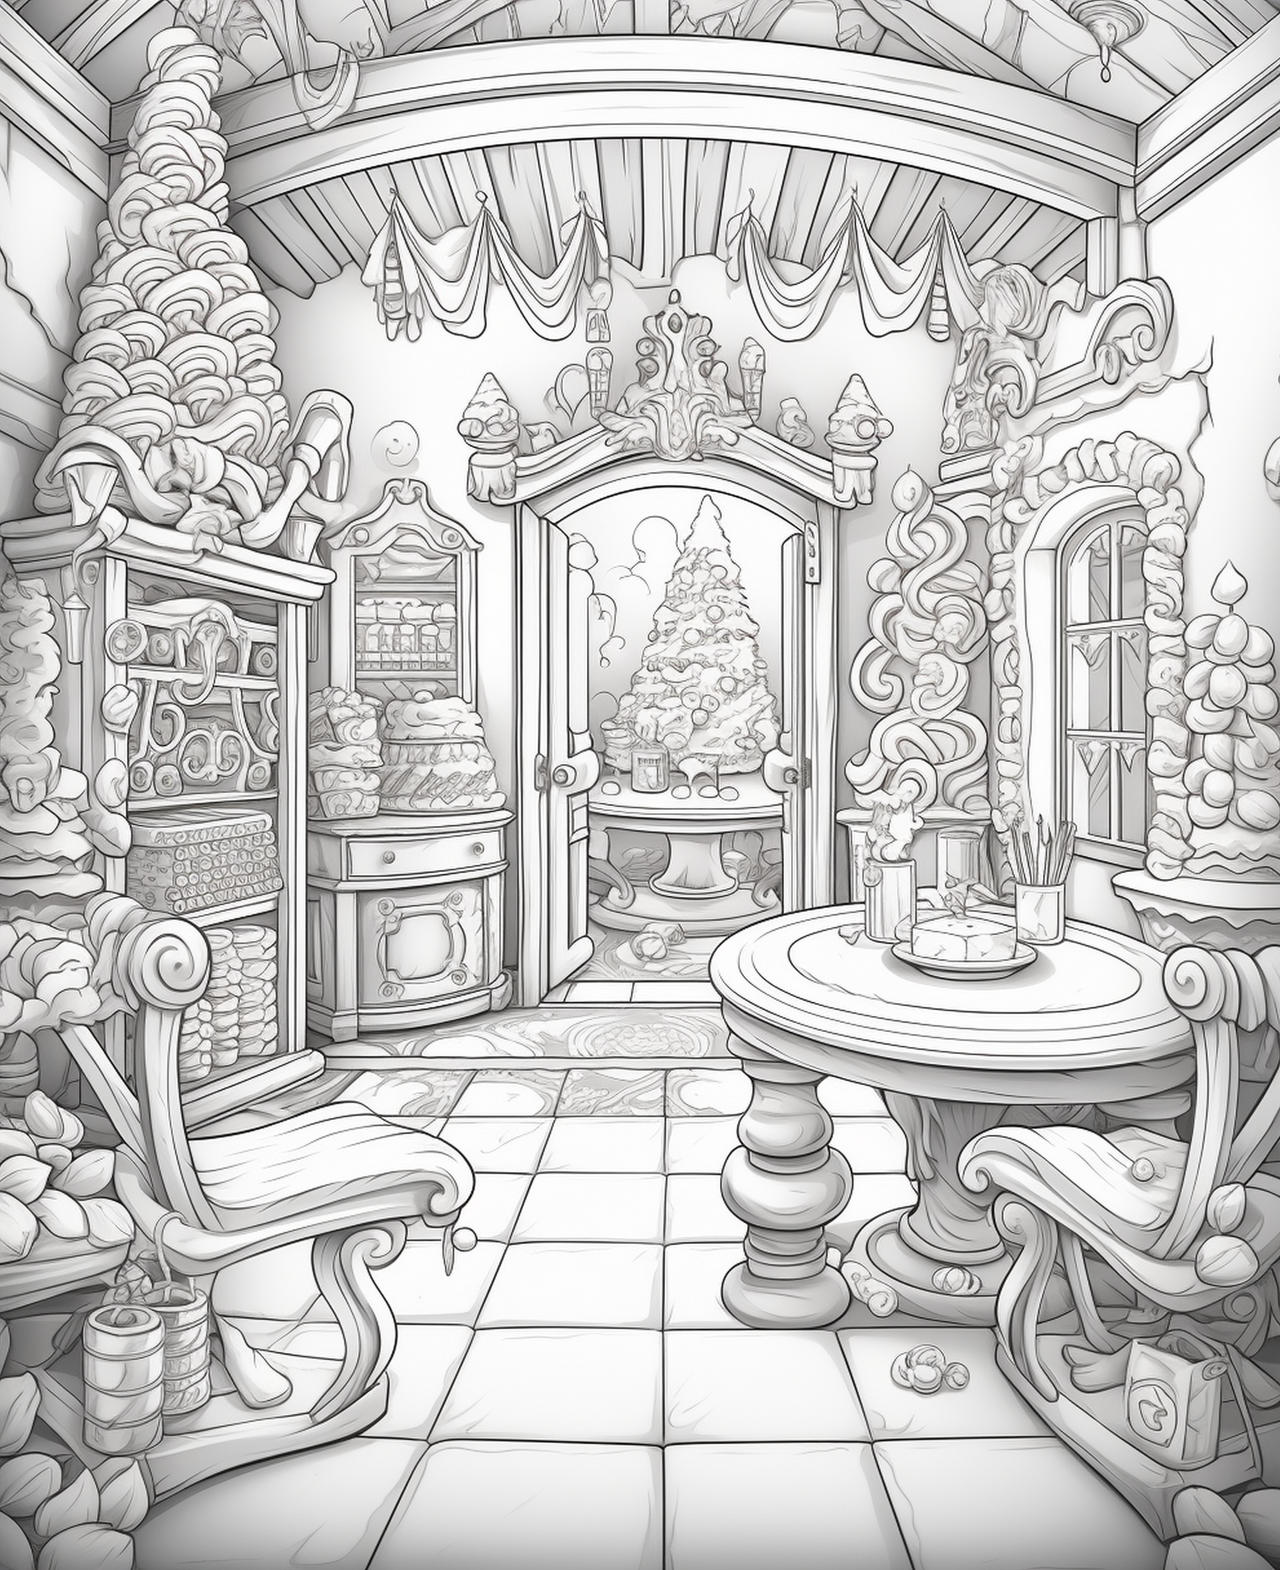 Candy houses coloring pages in premium quality by coloringbooksart on